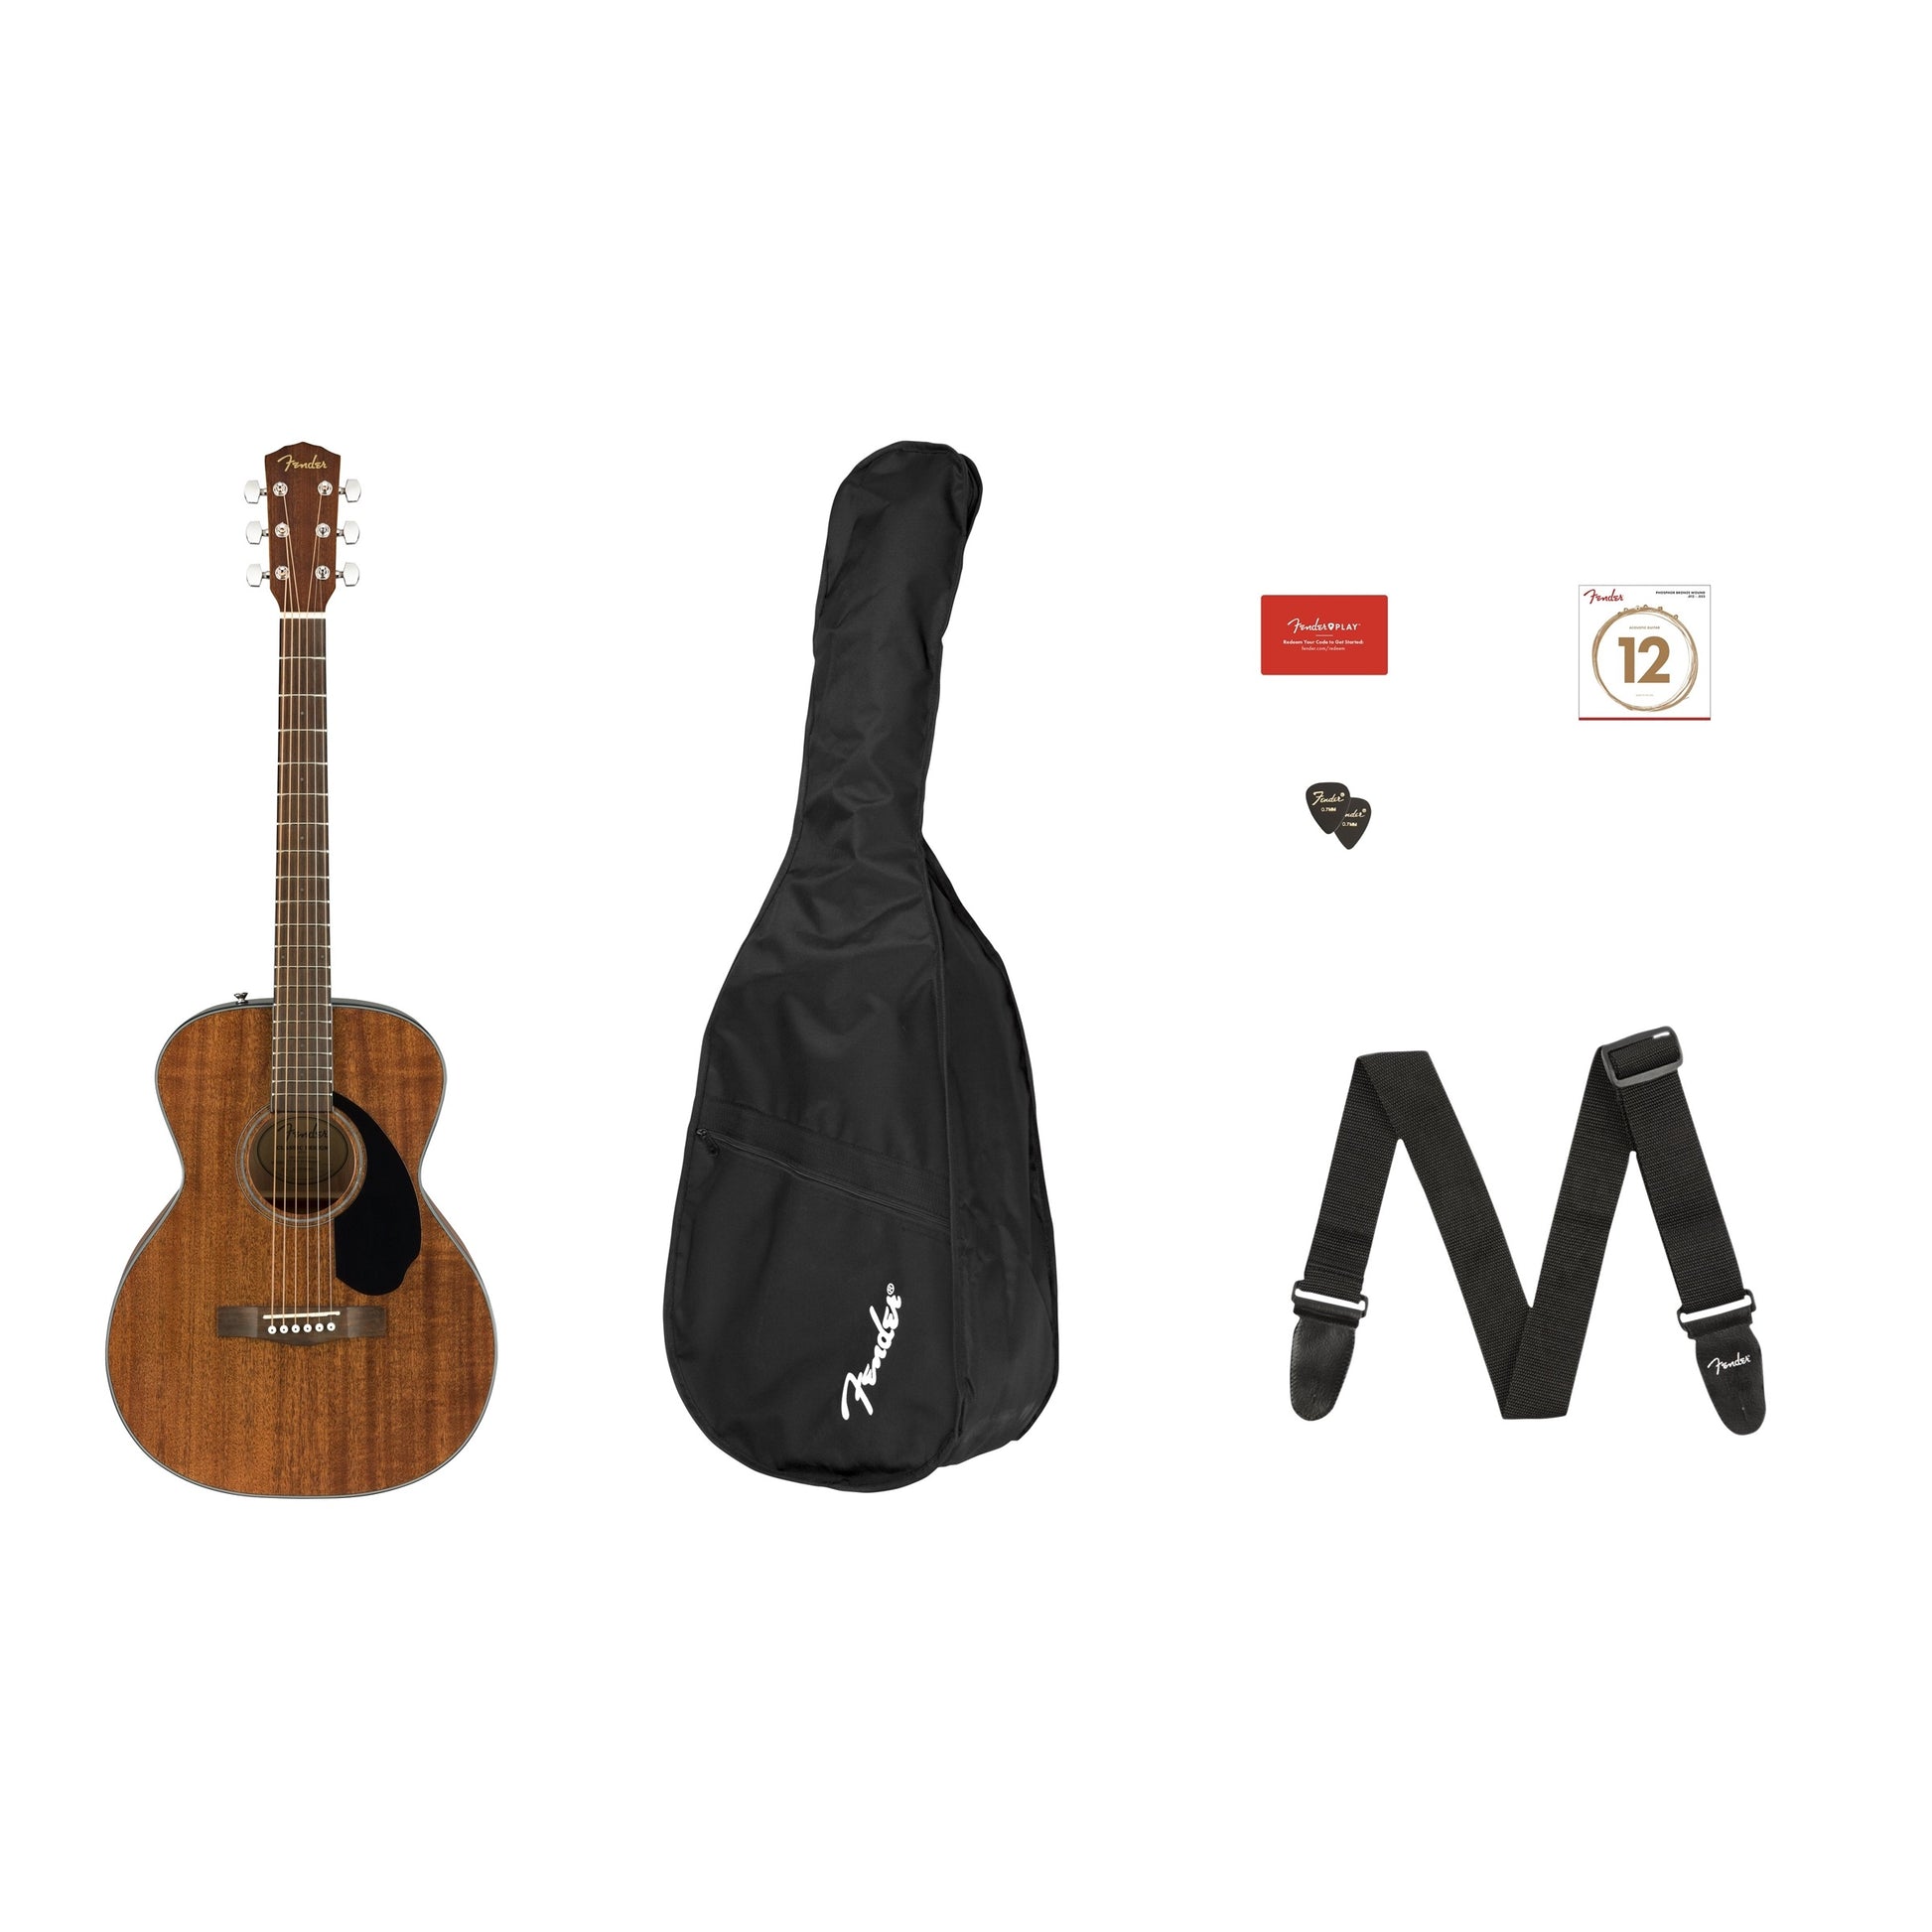 Full Guitar Pack with accessories for Fender CC-60S Concert Acoustic Guitar Pack